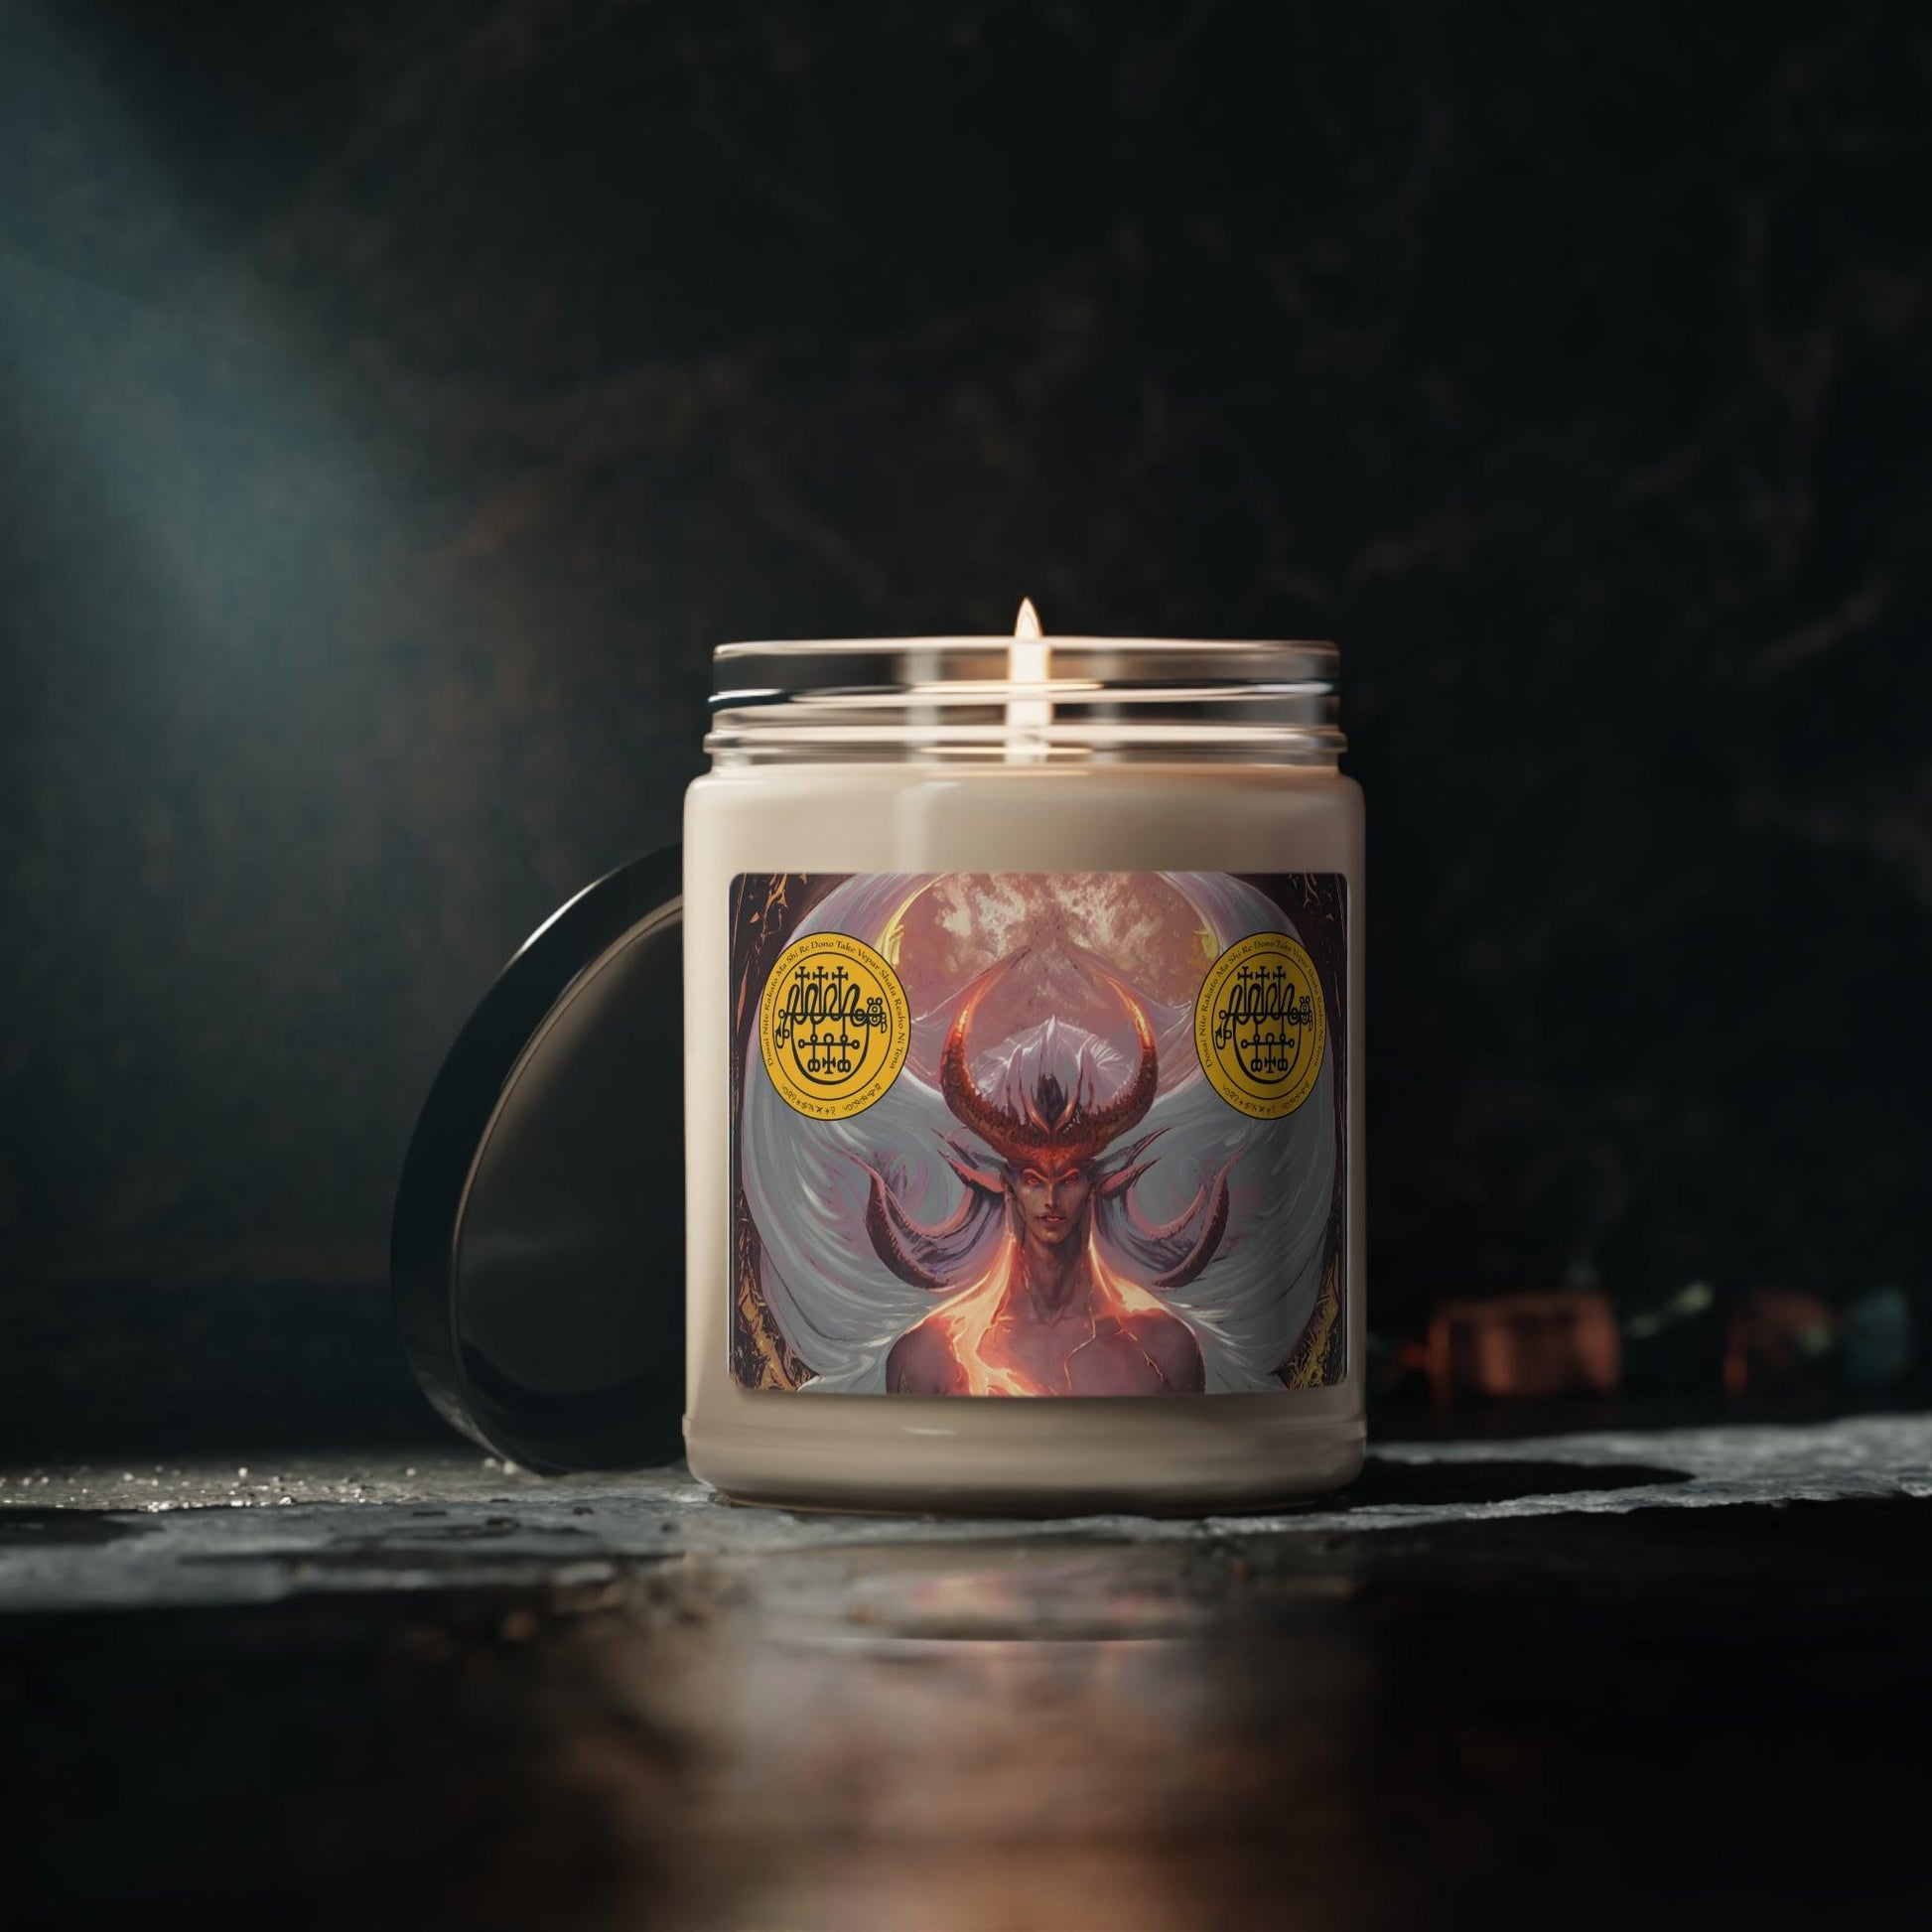 Demon-Vepar-Altar-Scented-Soy-Candle-for-offerings-rituals-initiations-or-praying-and-meditation-10